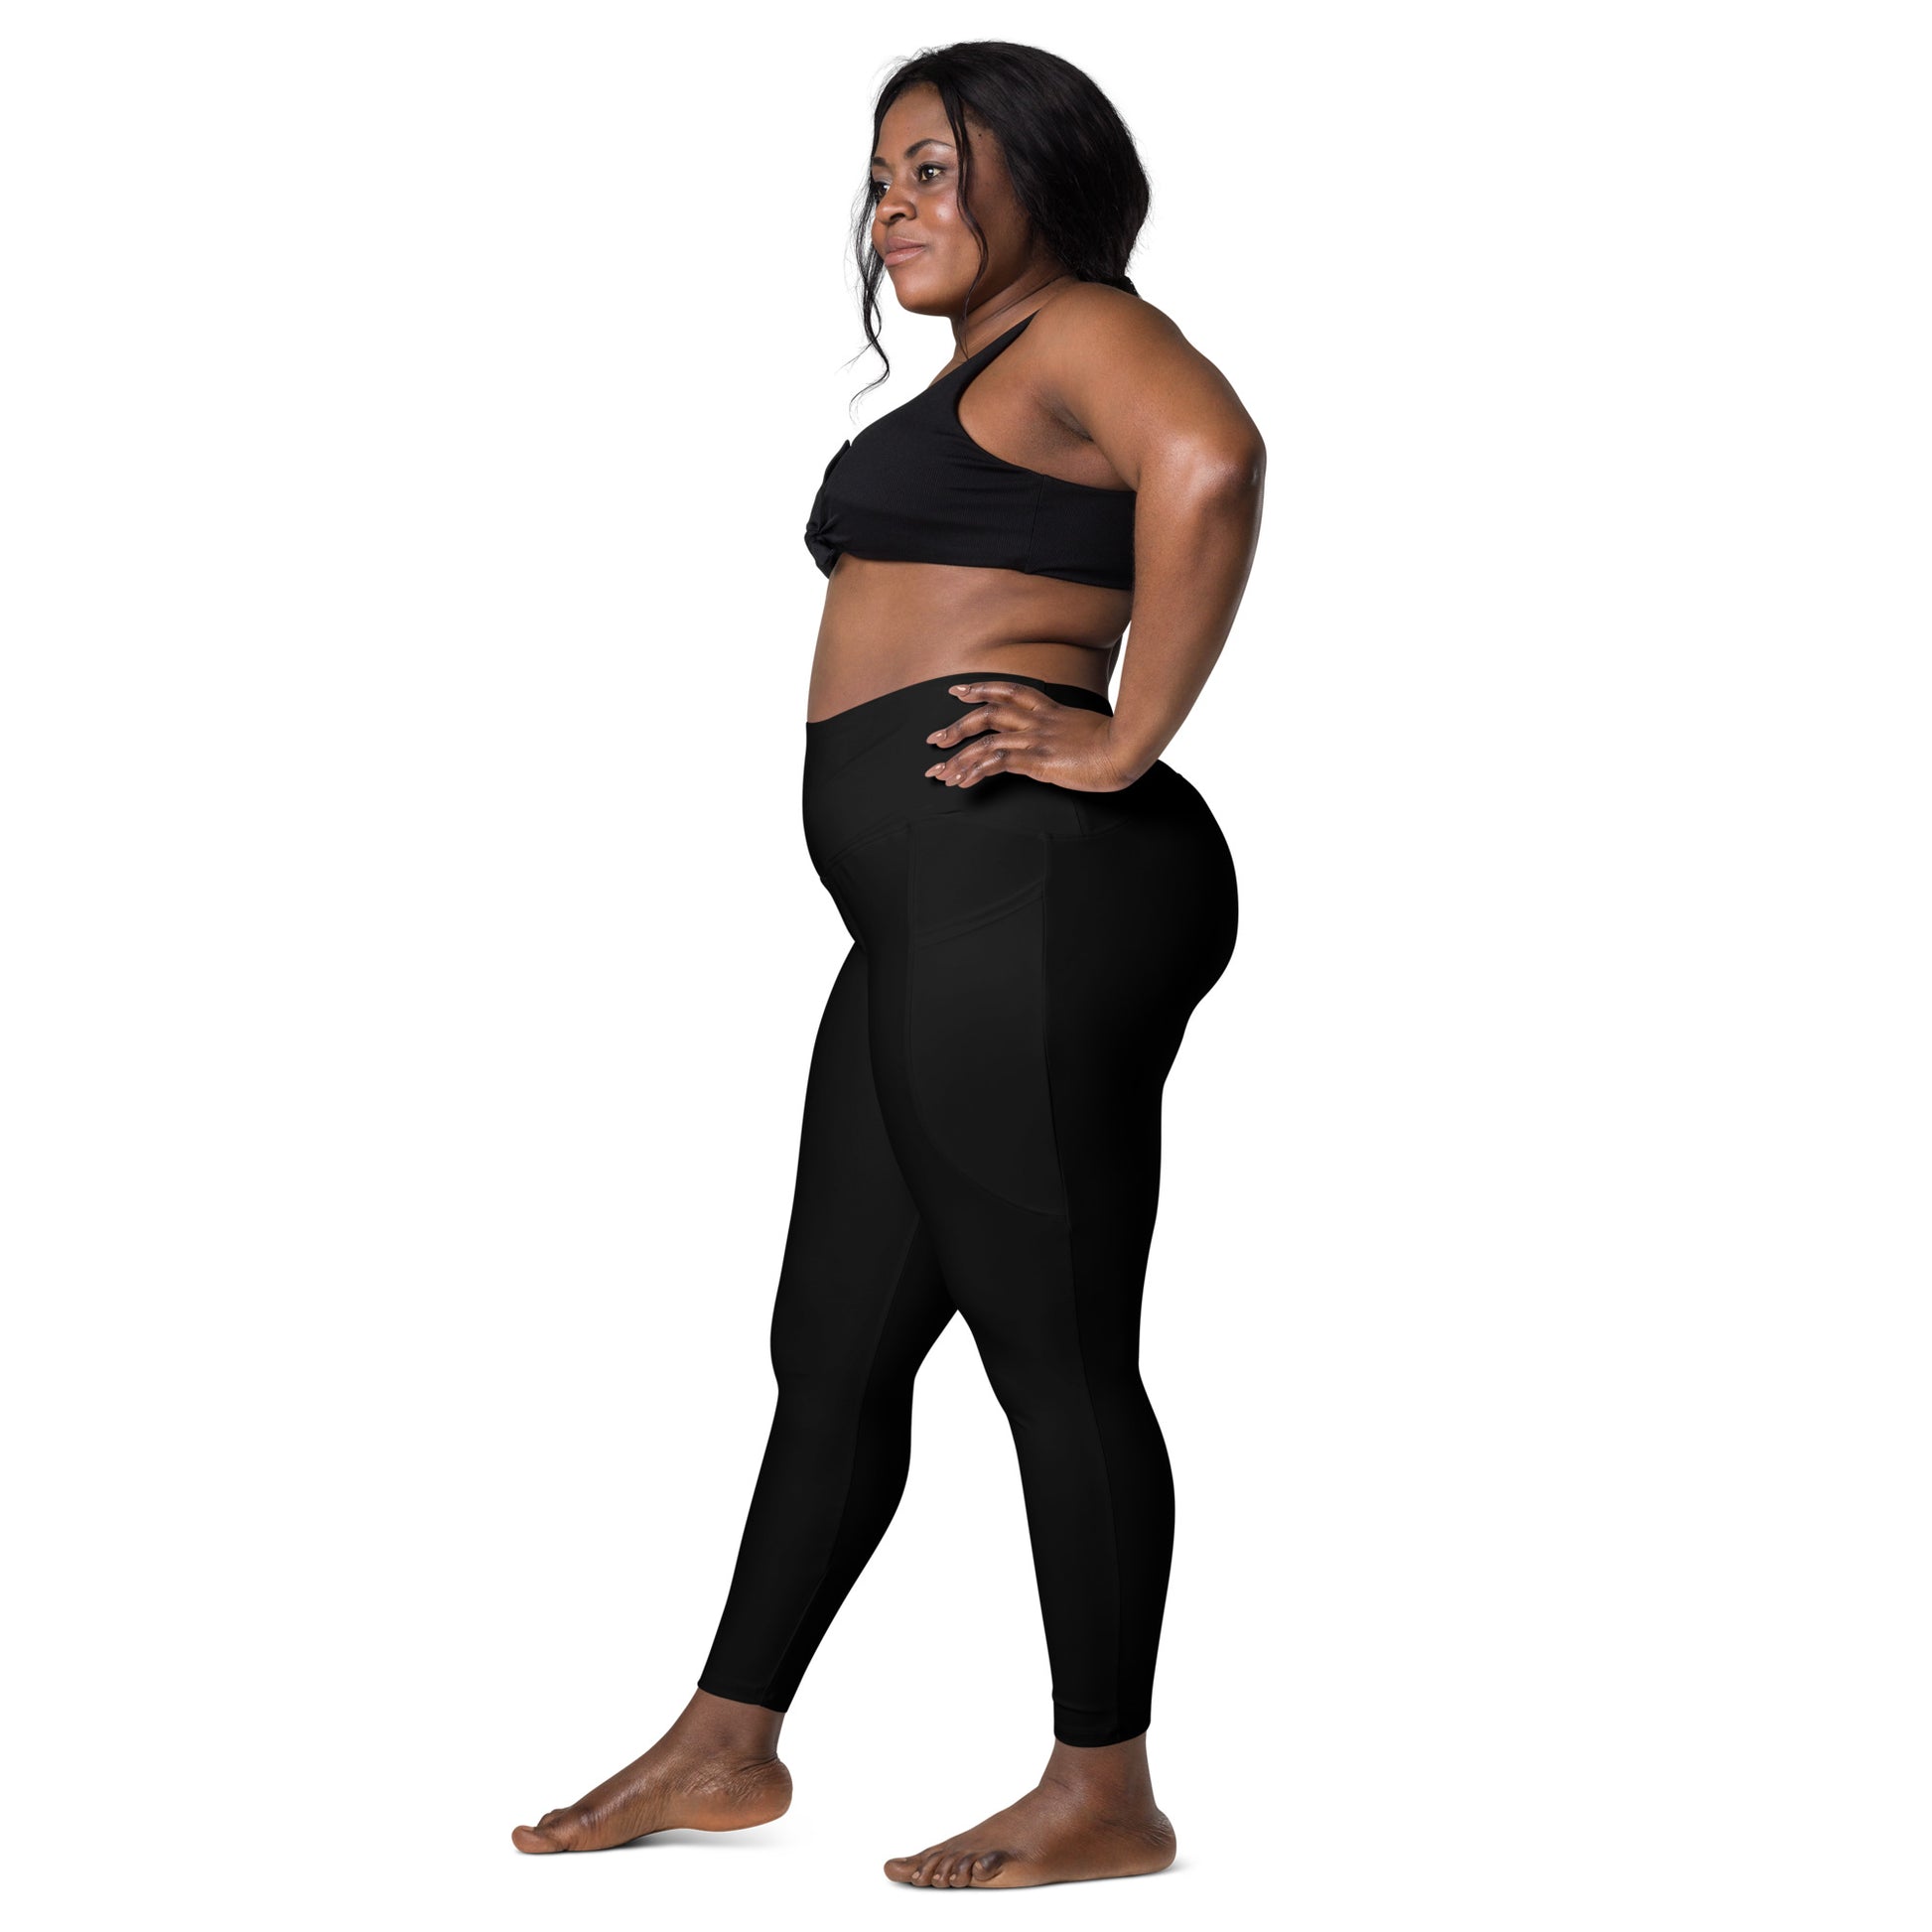 AP Fitness Leggings with pockets - Apply Pressure Fitness